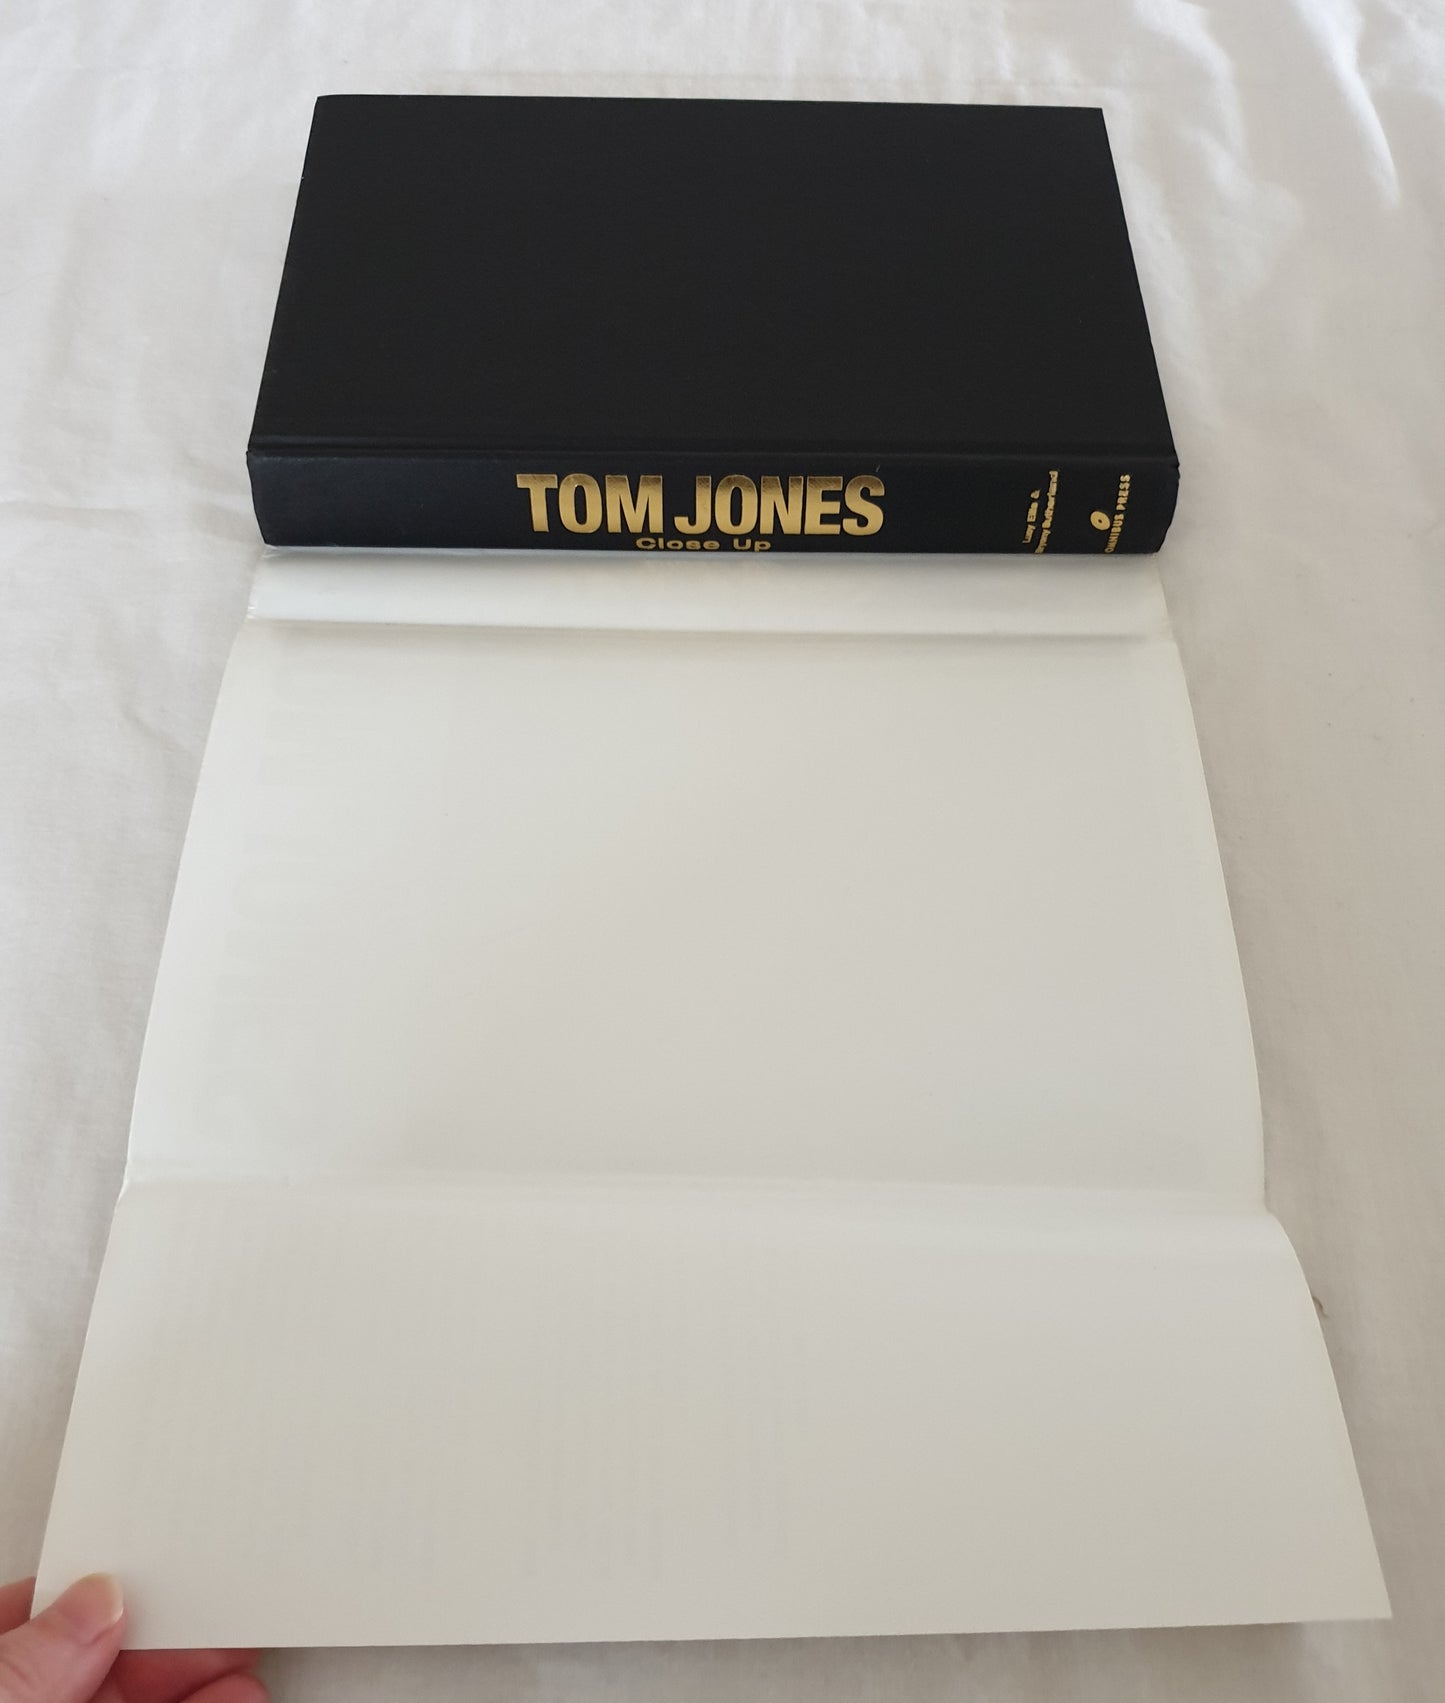 Tom Jones by Lucy Ellis and Bryony Sutherland